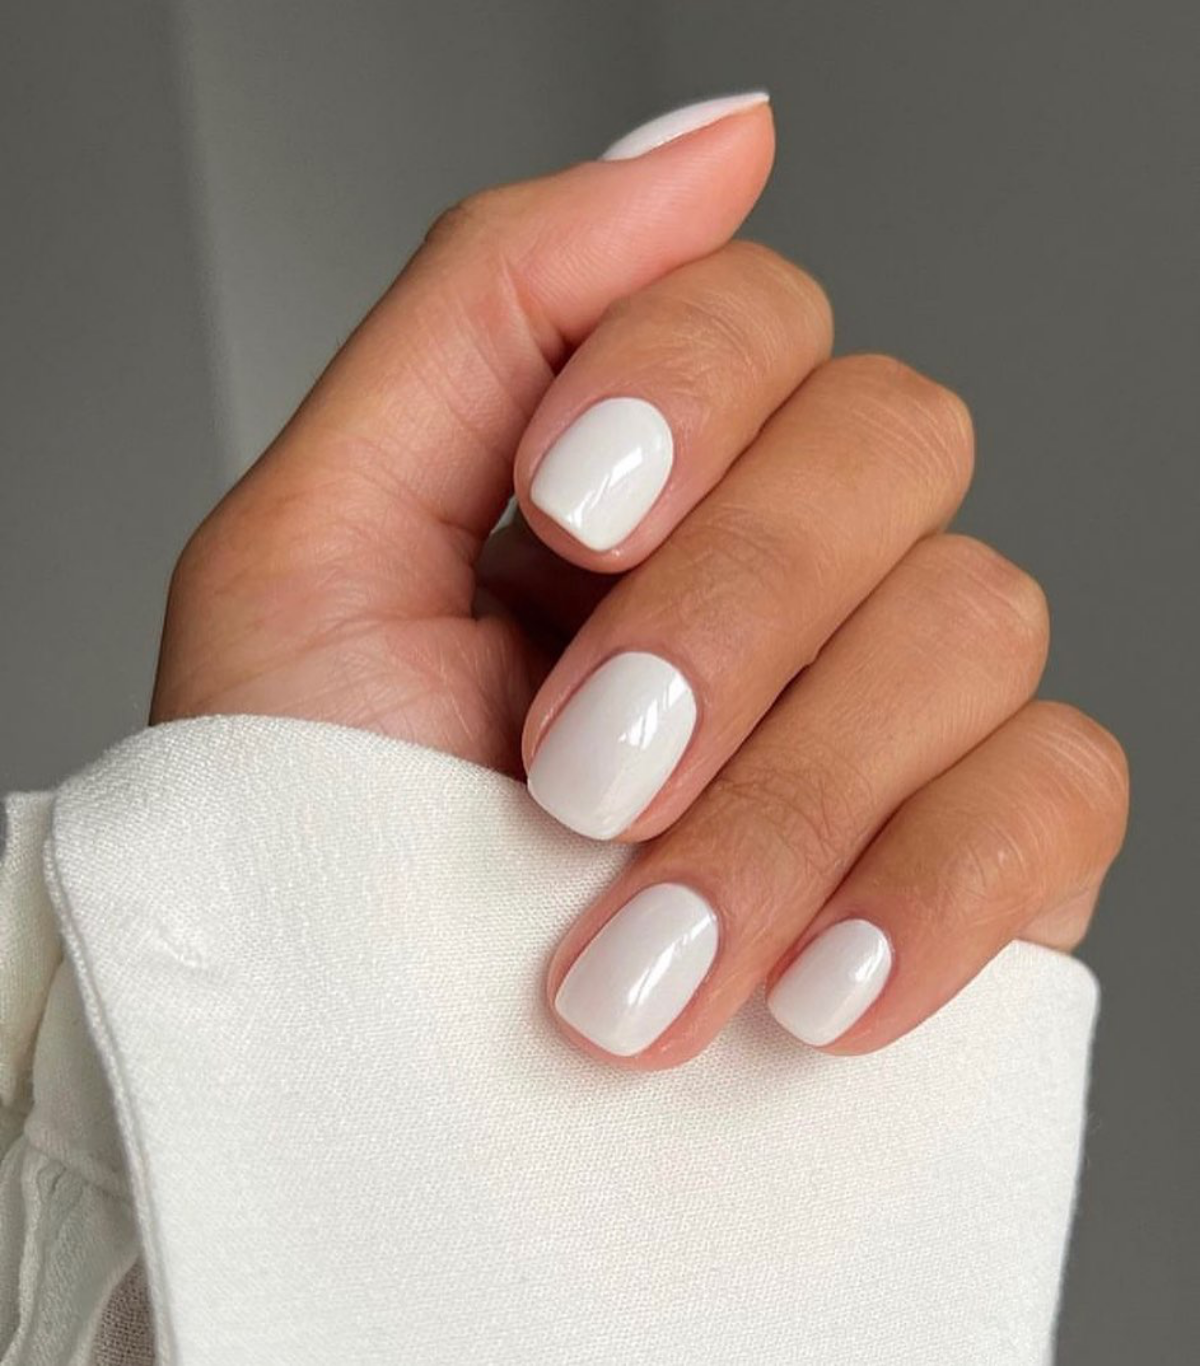 From Subtle To Striking: 11 Stunning White Nail Ideas